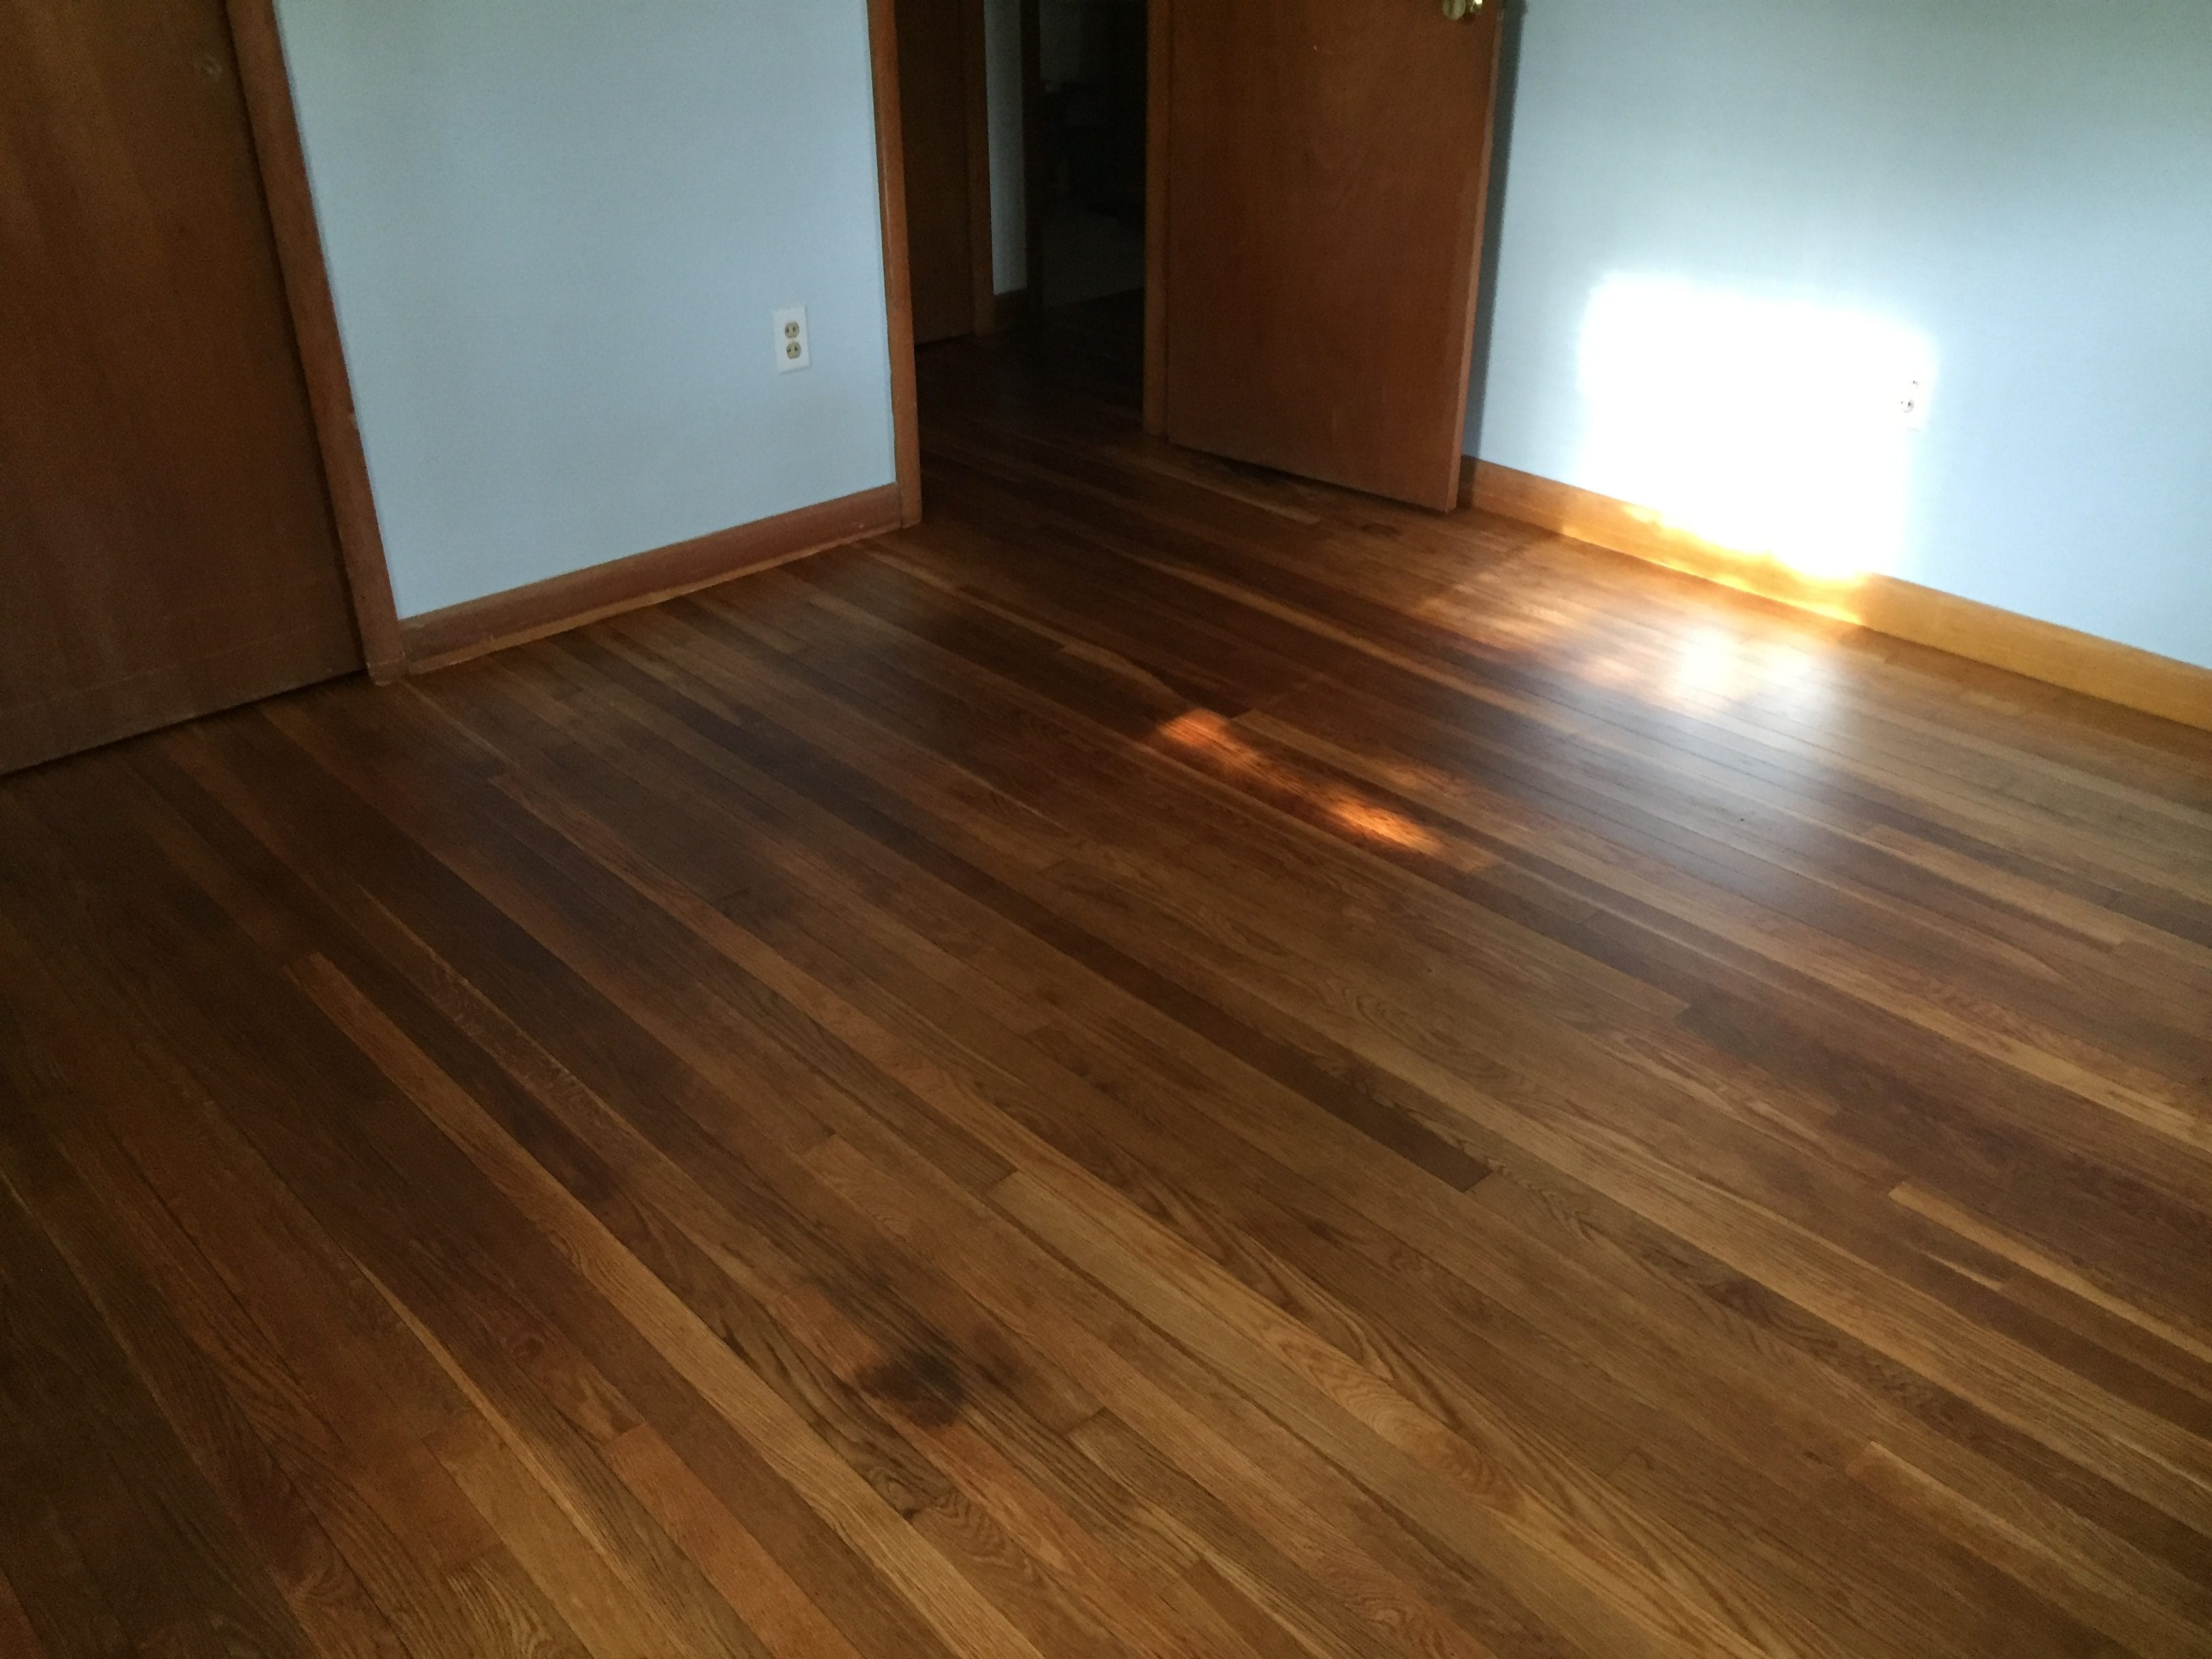 16 Unique Hardwood Floor Refinishing Concord Nh 2024 free download hardwood floor refinishing concord nh of update to a front deck local flooring pros for red oak hardwood floor refinishing in hudson nh